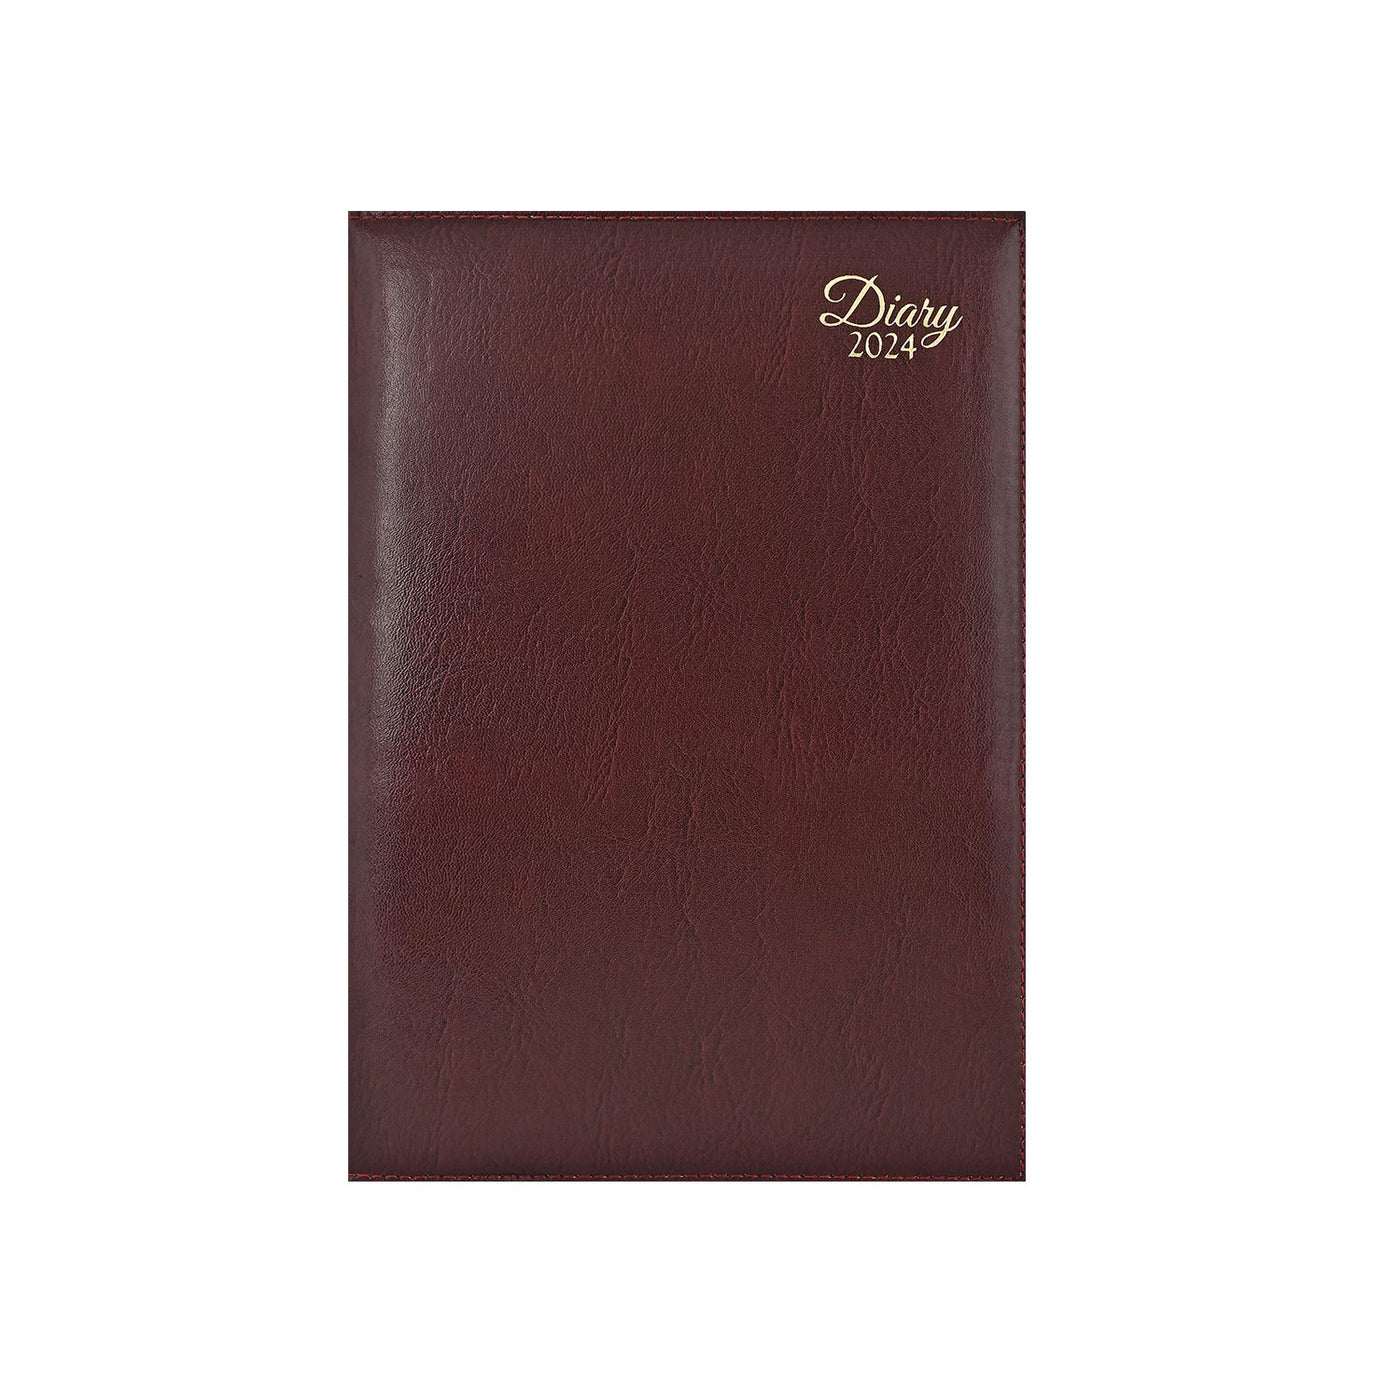 Scholar Leatherite 2024 A5 Daily Planner – Maroon